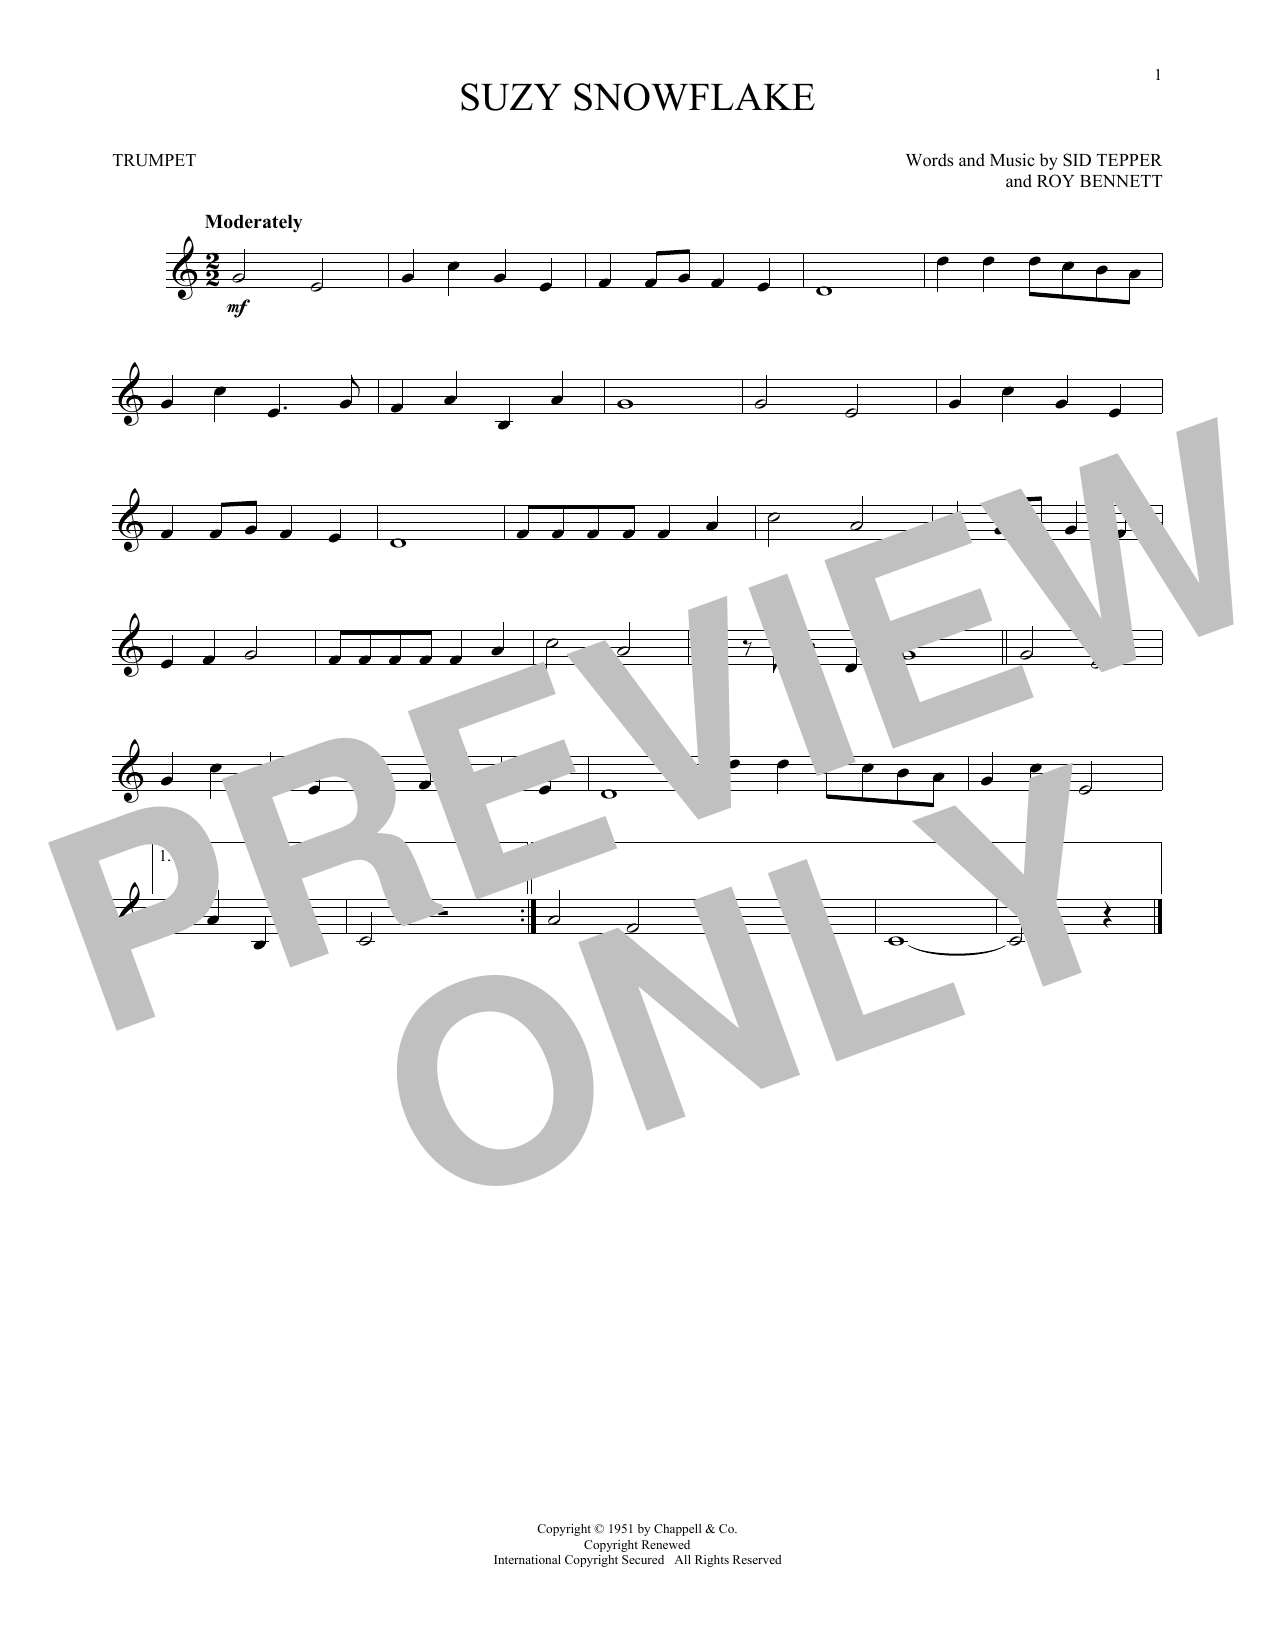 Download Sid Tepper Suzy Snowflake Sheet Music